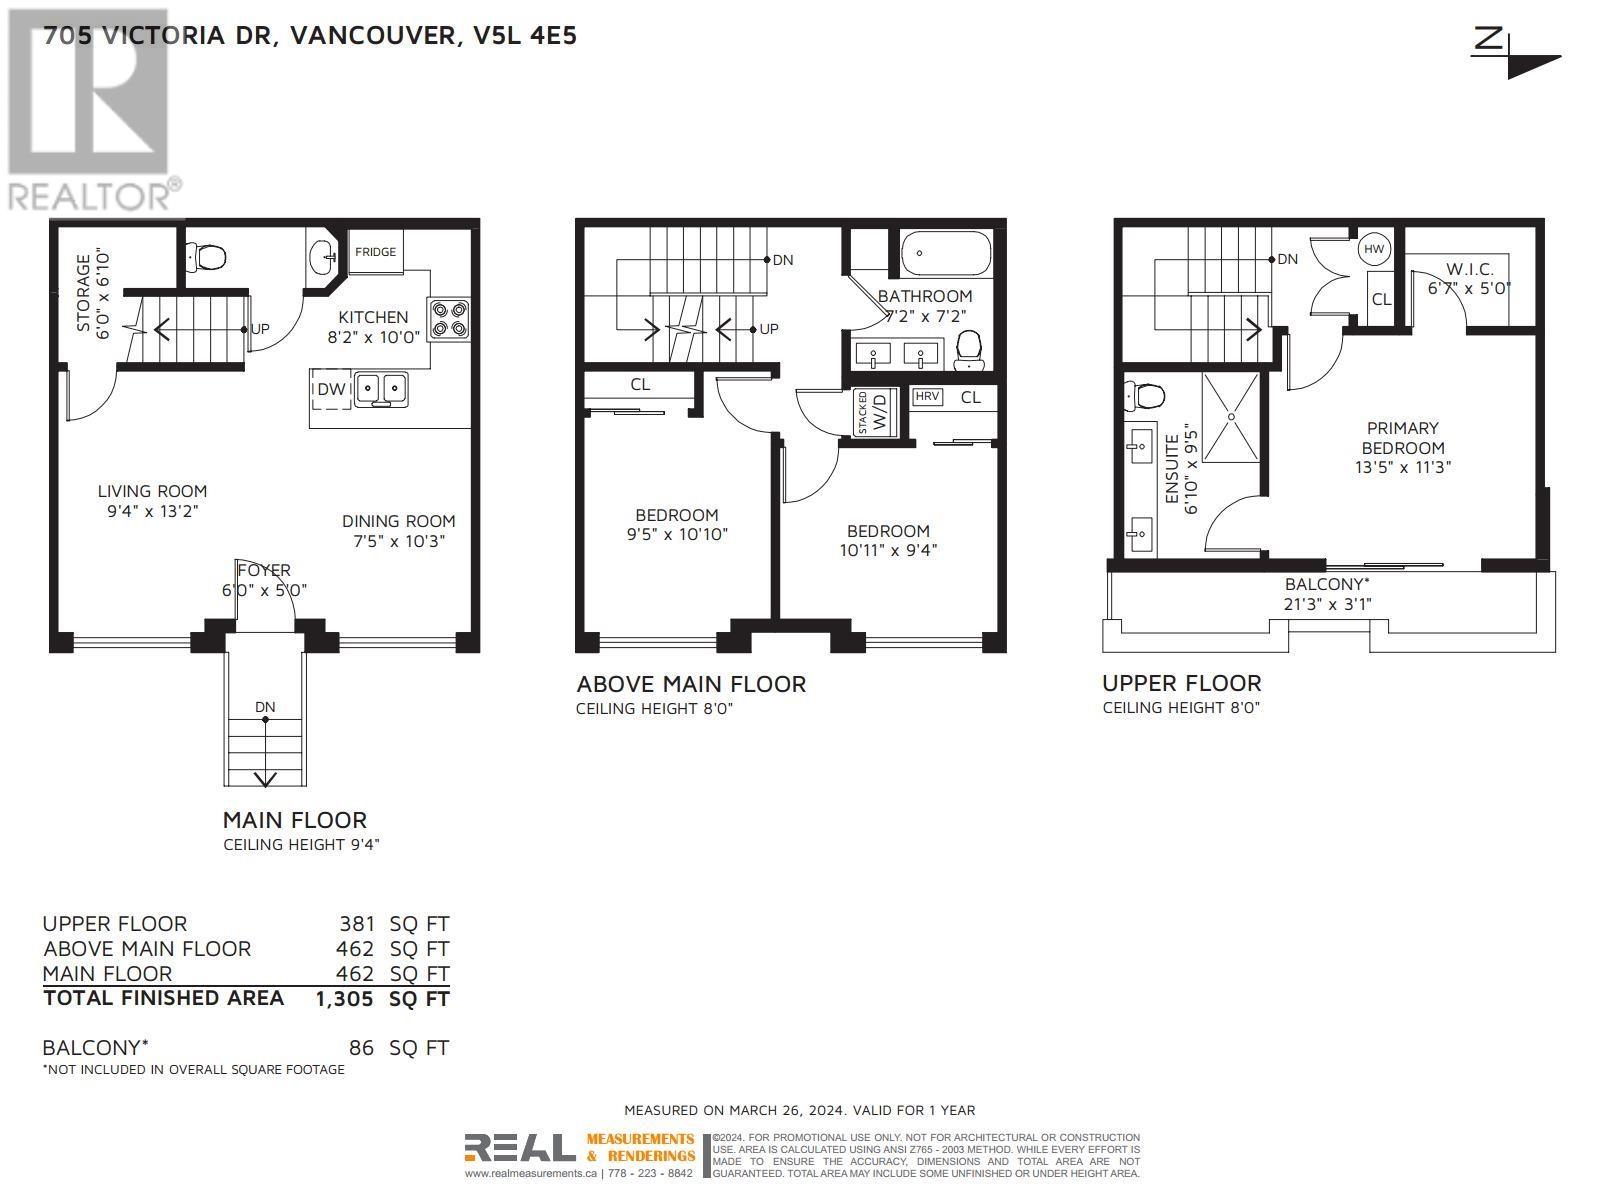 Listing Picture 38 of 38 : 705 VICTORIA DRIVE, Vancouver / 溫哥華 - 魯藝地產 Yvonne Lu Group - MLS Medallion Club Member